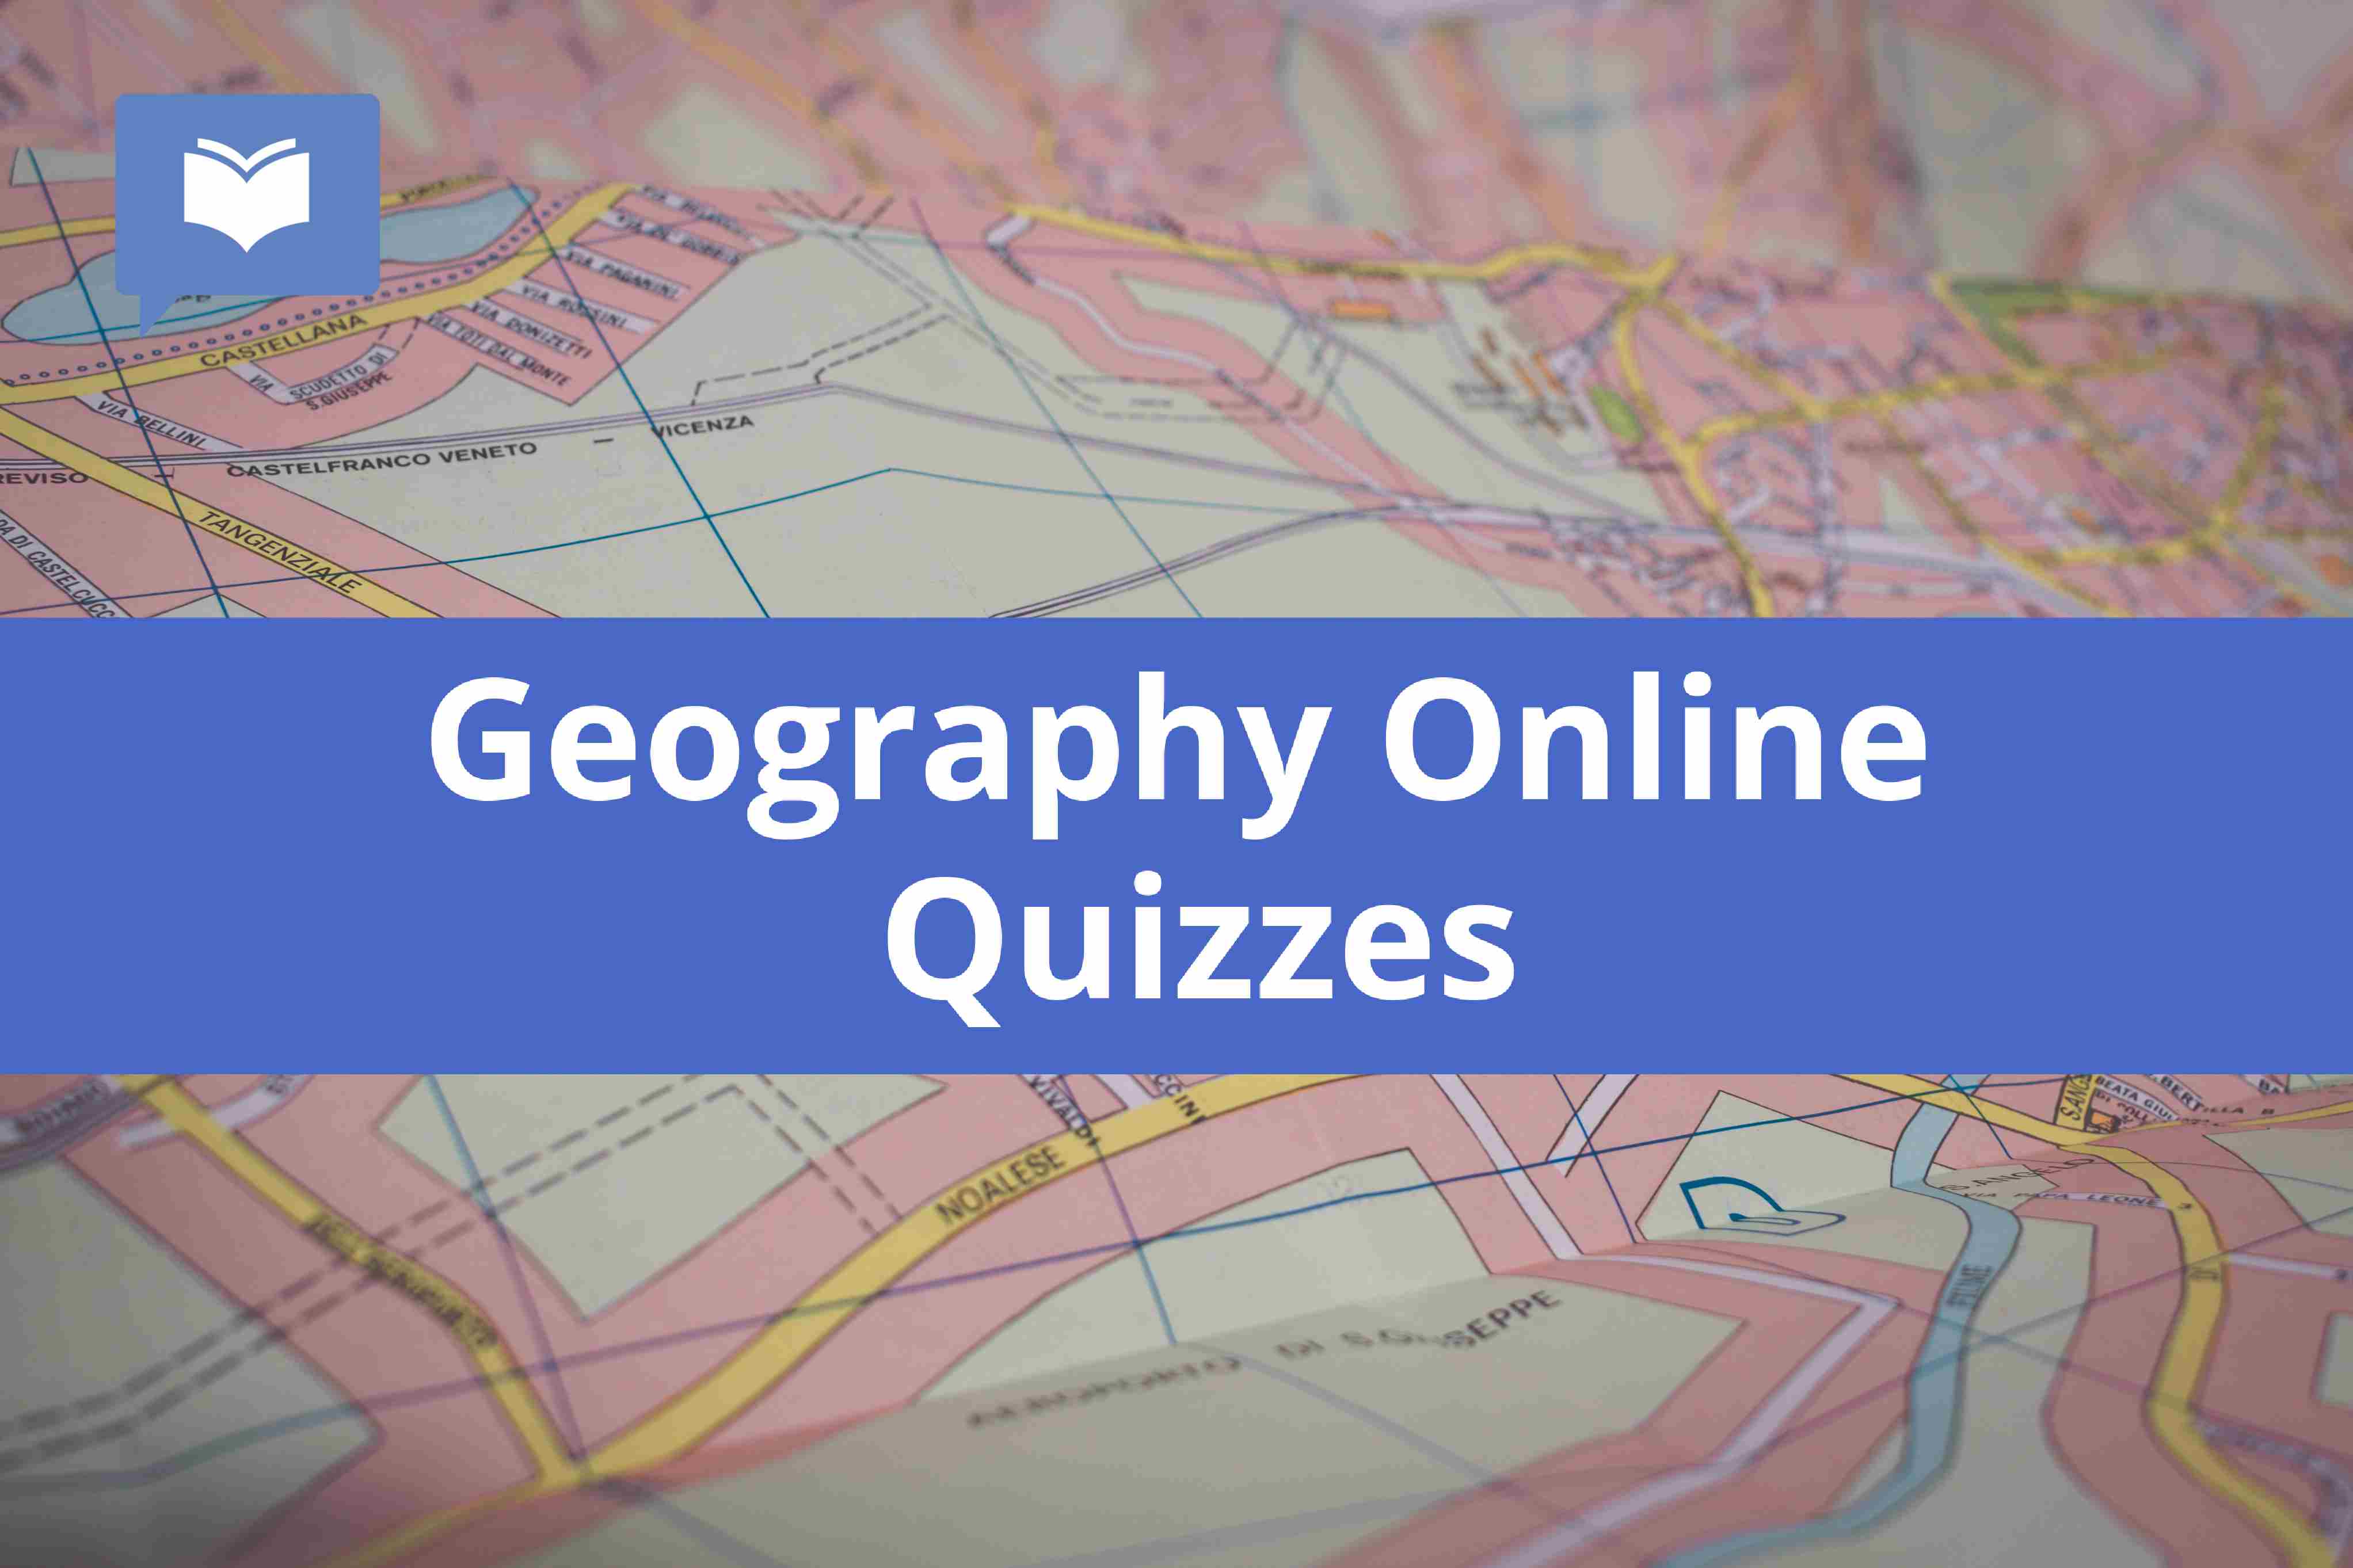 Geography Online Quizzes